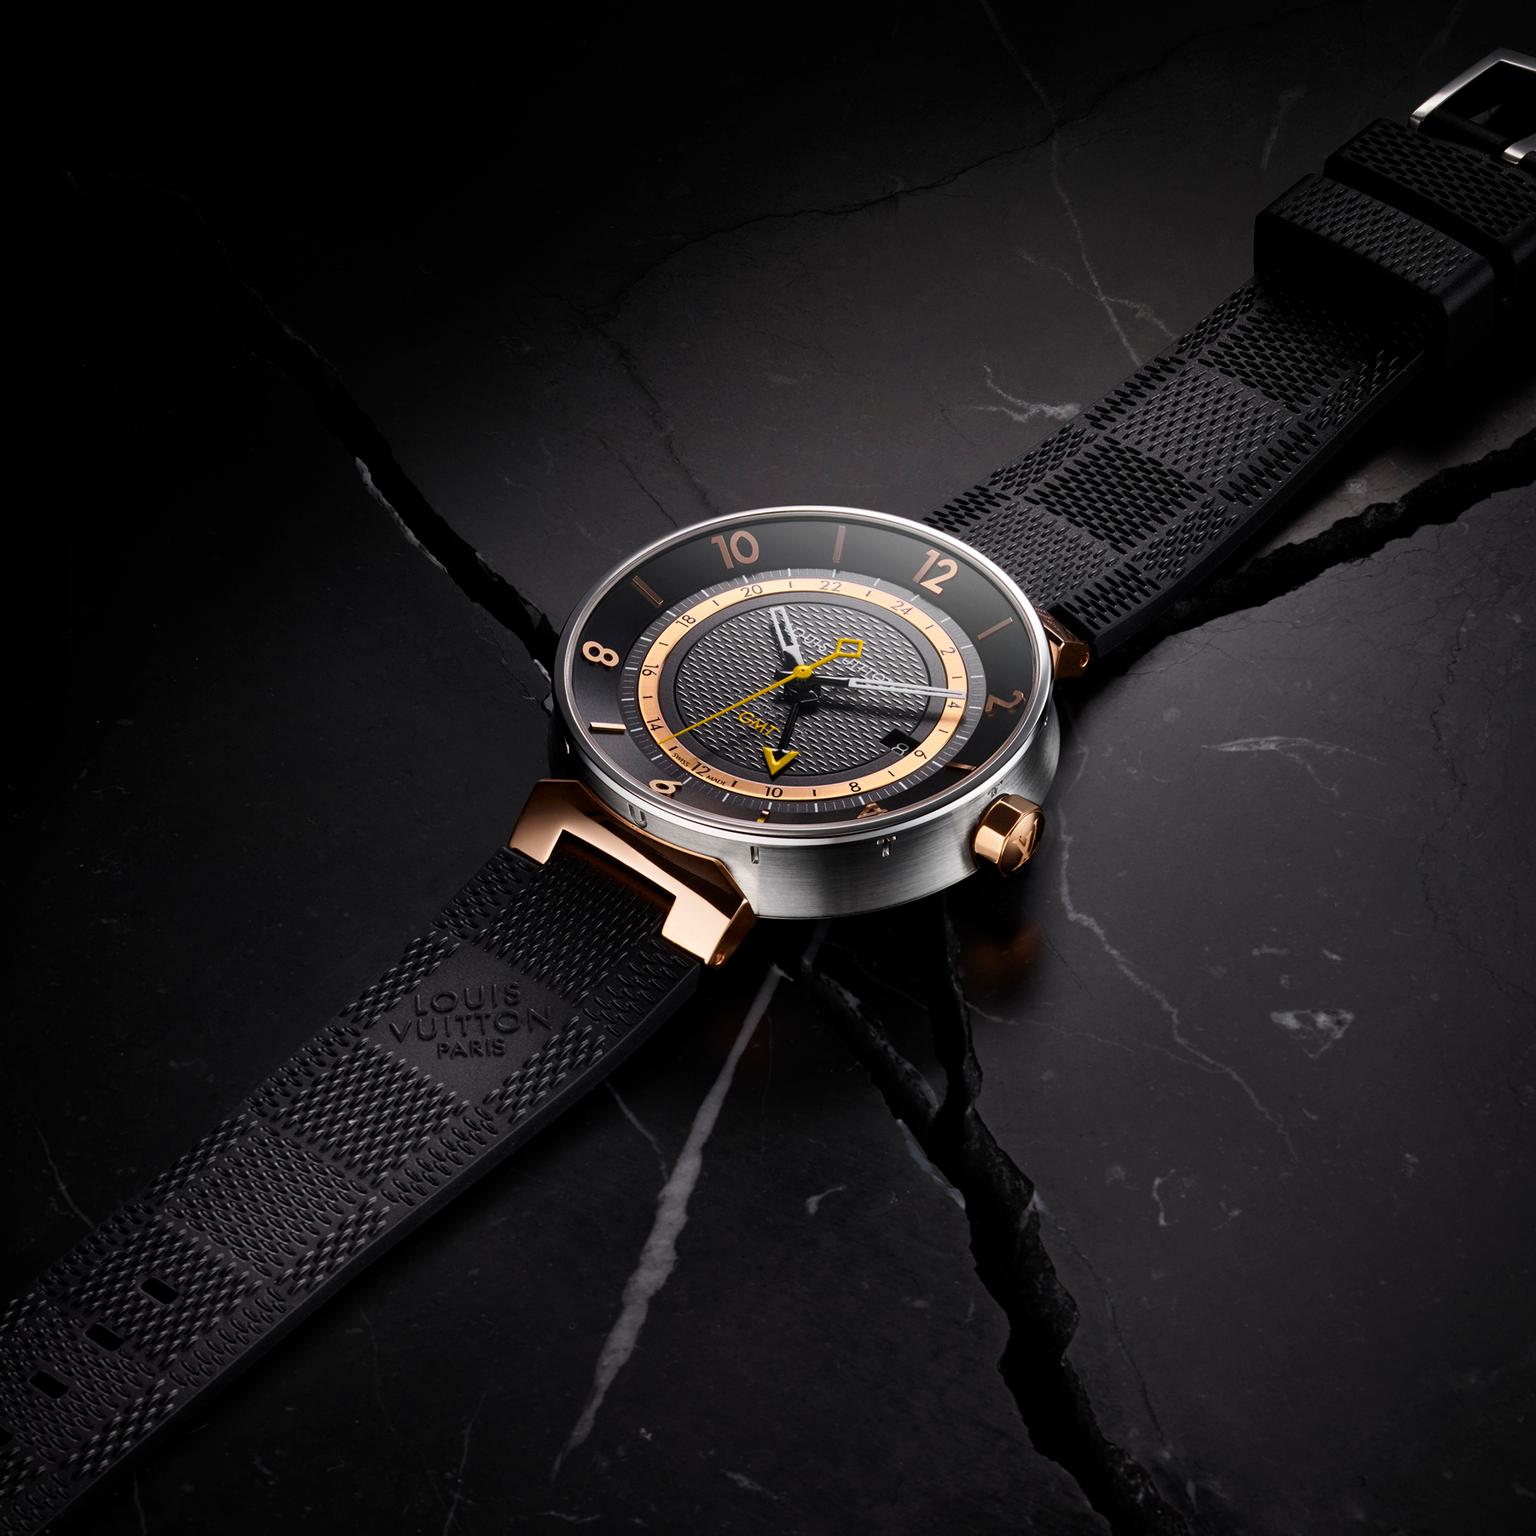 Louis Vuitton Tambour Moon GMT Black watch in steel and pink gold